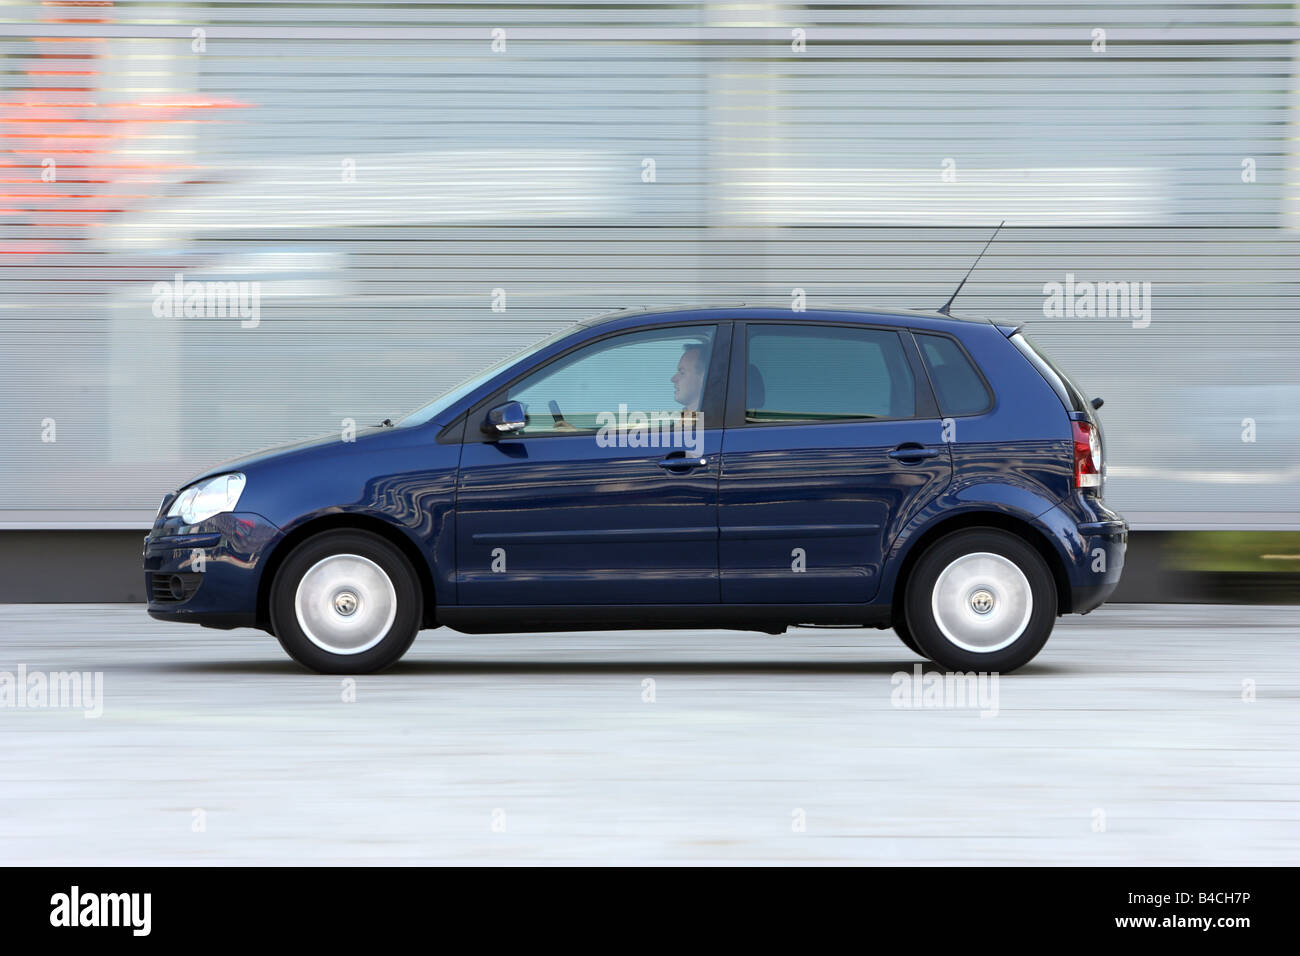 VW Volkswagen Polo 1.4 TDI, model year 2005-, dunkelblue moving, side view,  City Stock Photo - Alamy